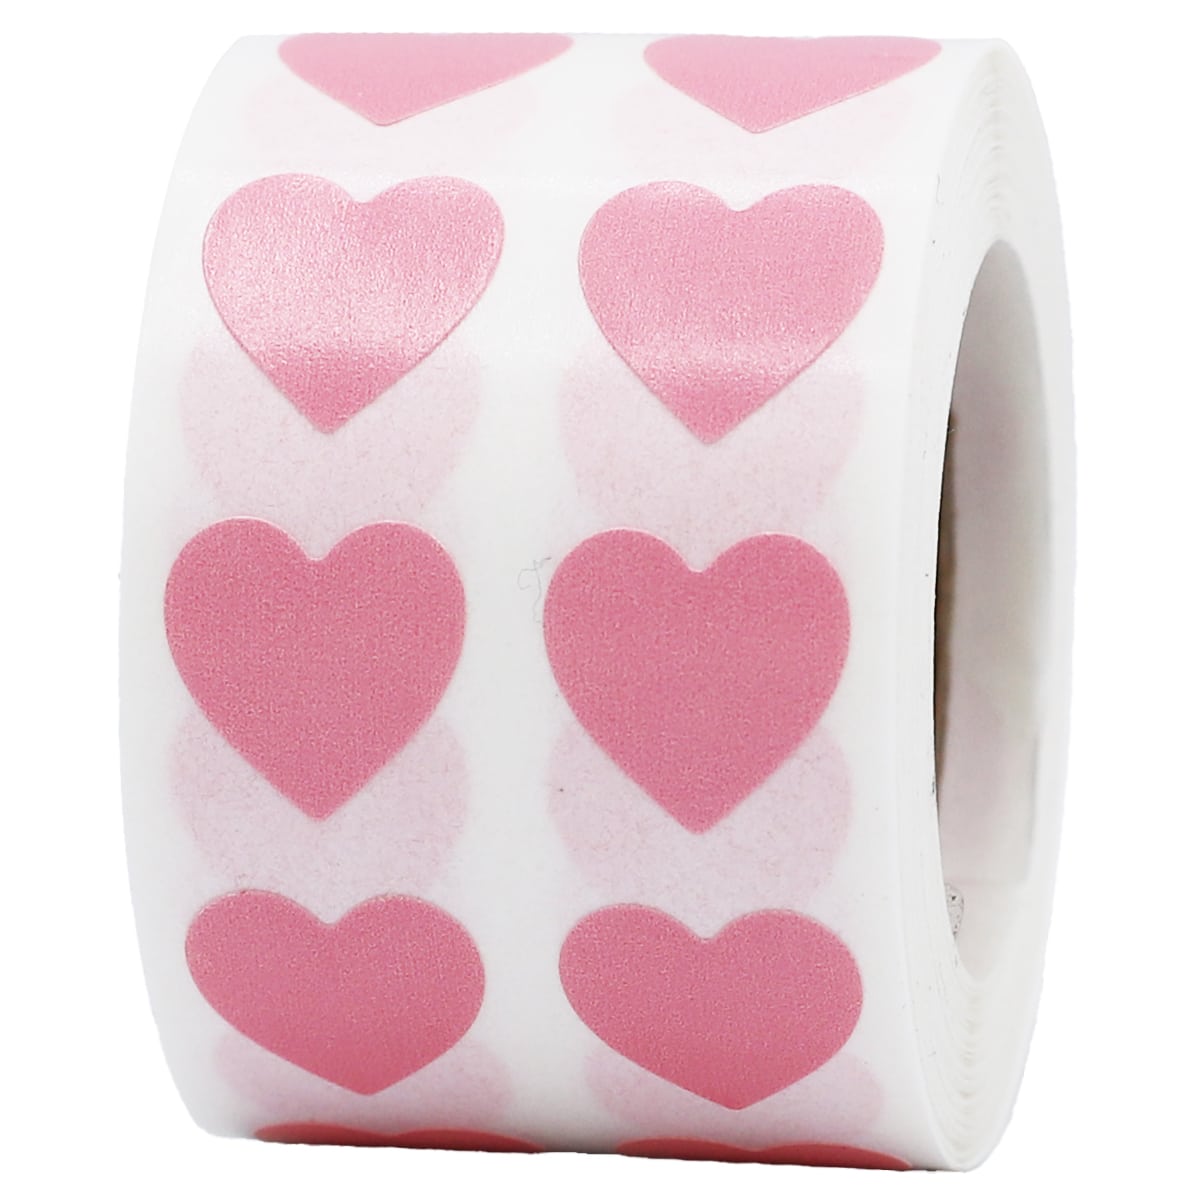 Small Pink Heart 1/2 Round Stickers 1,000 Count - InStock Labels